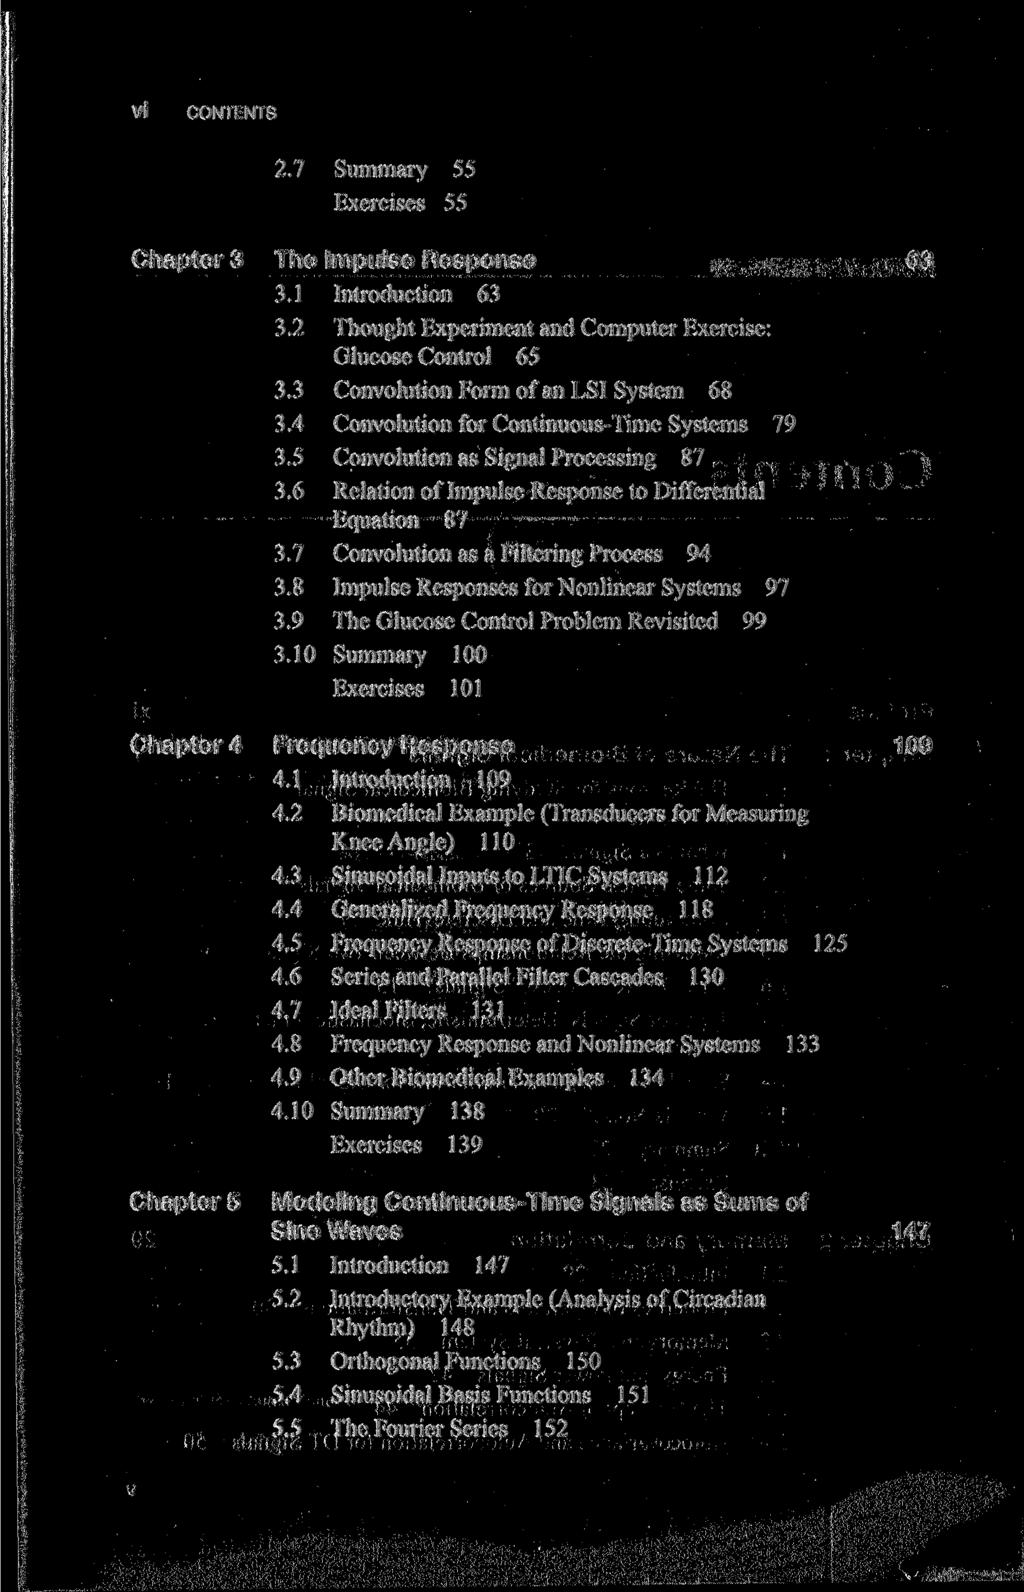 VI CONTENTS 2.7 Summary 55 Exercises 55 Chapter 3 The Impulse Response 63 3.1 Introduction 63 3.2 Thought Experiment and Computer Exercise: Glucose Control 65 3.